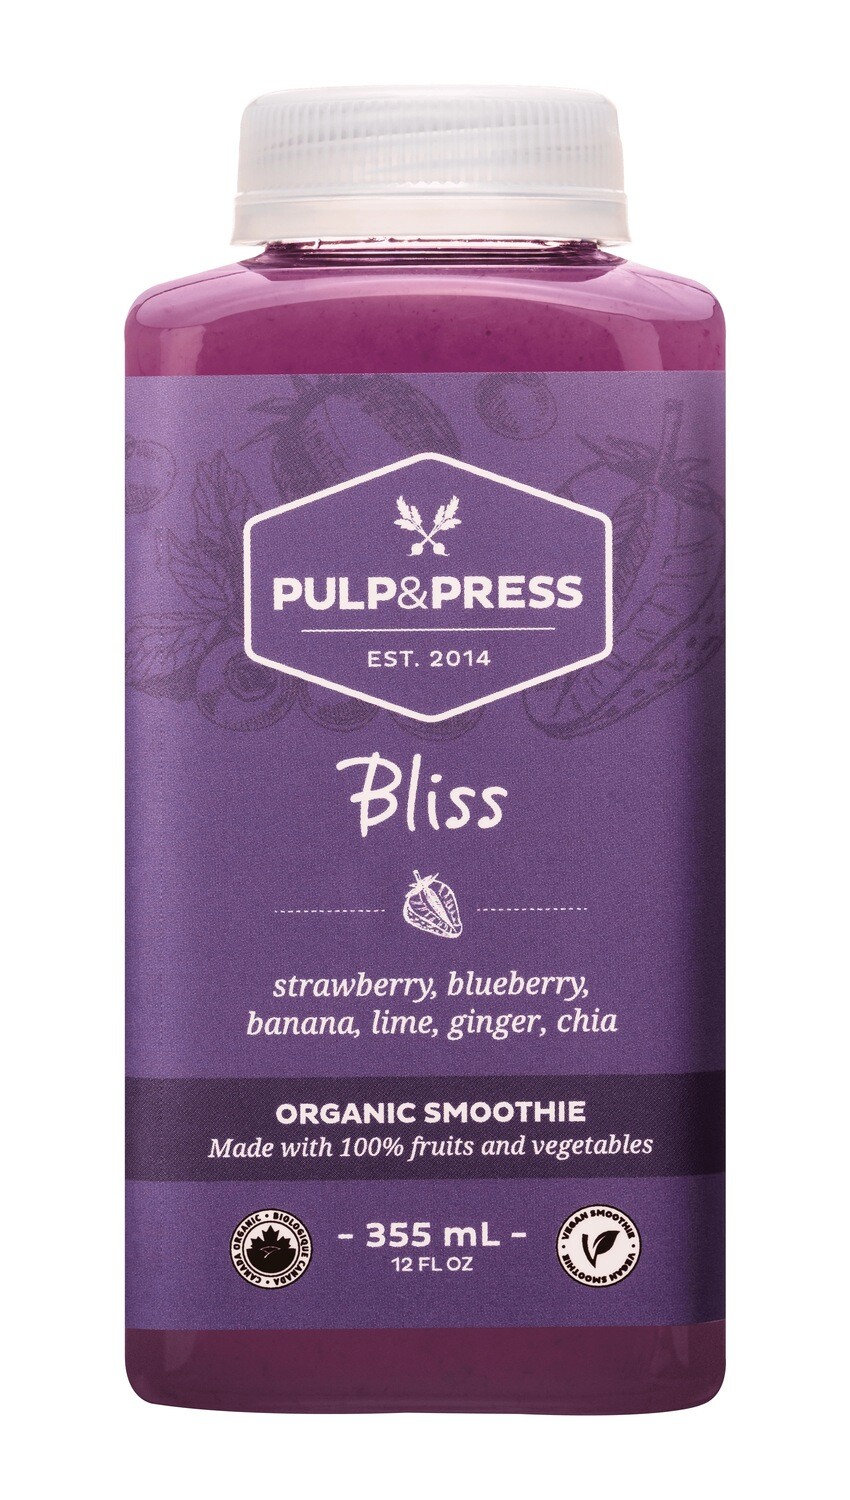 Pulp & Press - Bliss Smoothie 355ml